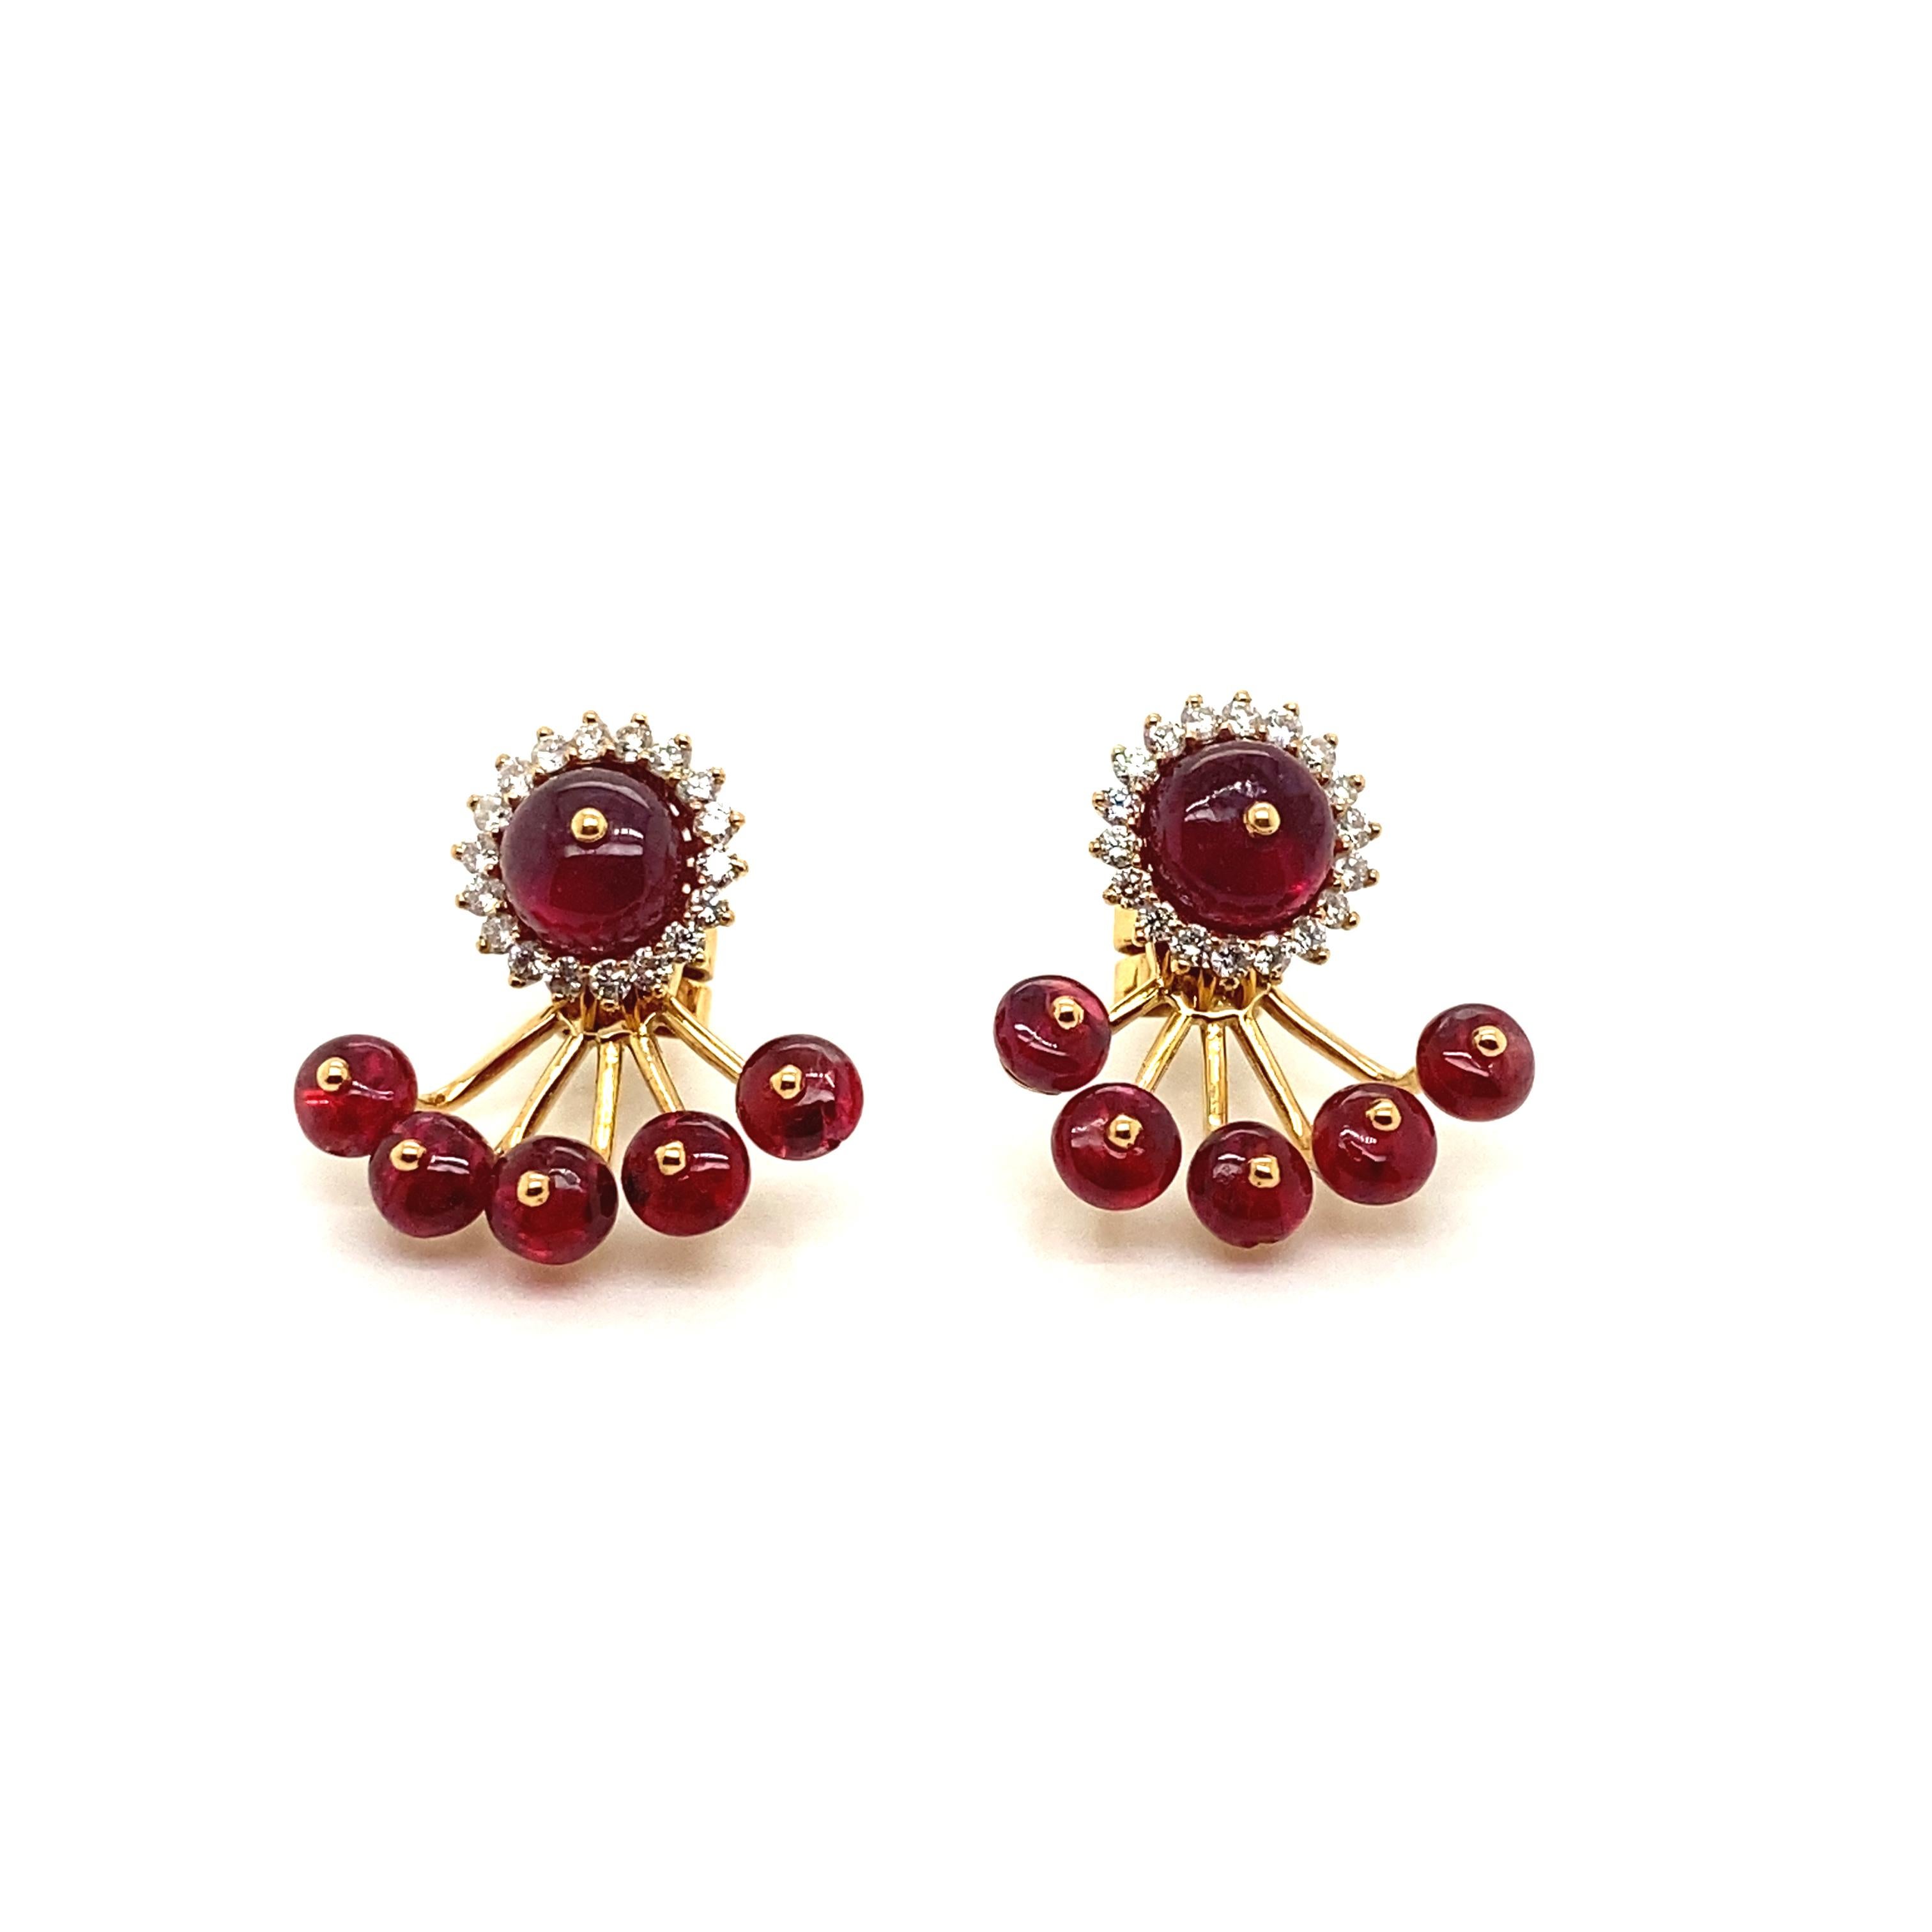 12.98 Carat Natural Red Spinel Beads and White Diamond Gold Earrings:

A playful pair of earrings, it features natural intense red spinel beads weighing 12.98 carat, with the tops surrounded by white round brilliant-cut diamonds weighing 0.68 carat.